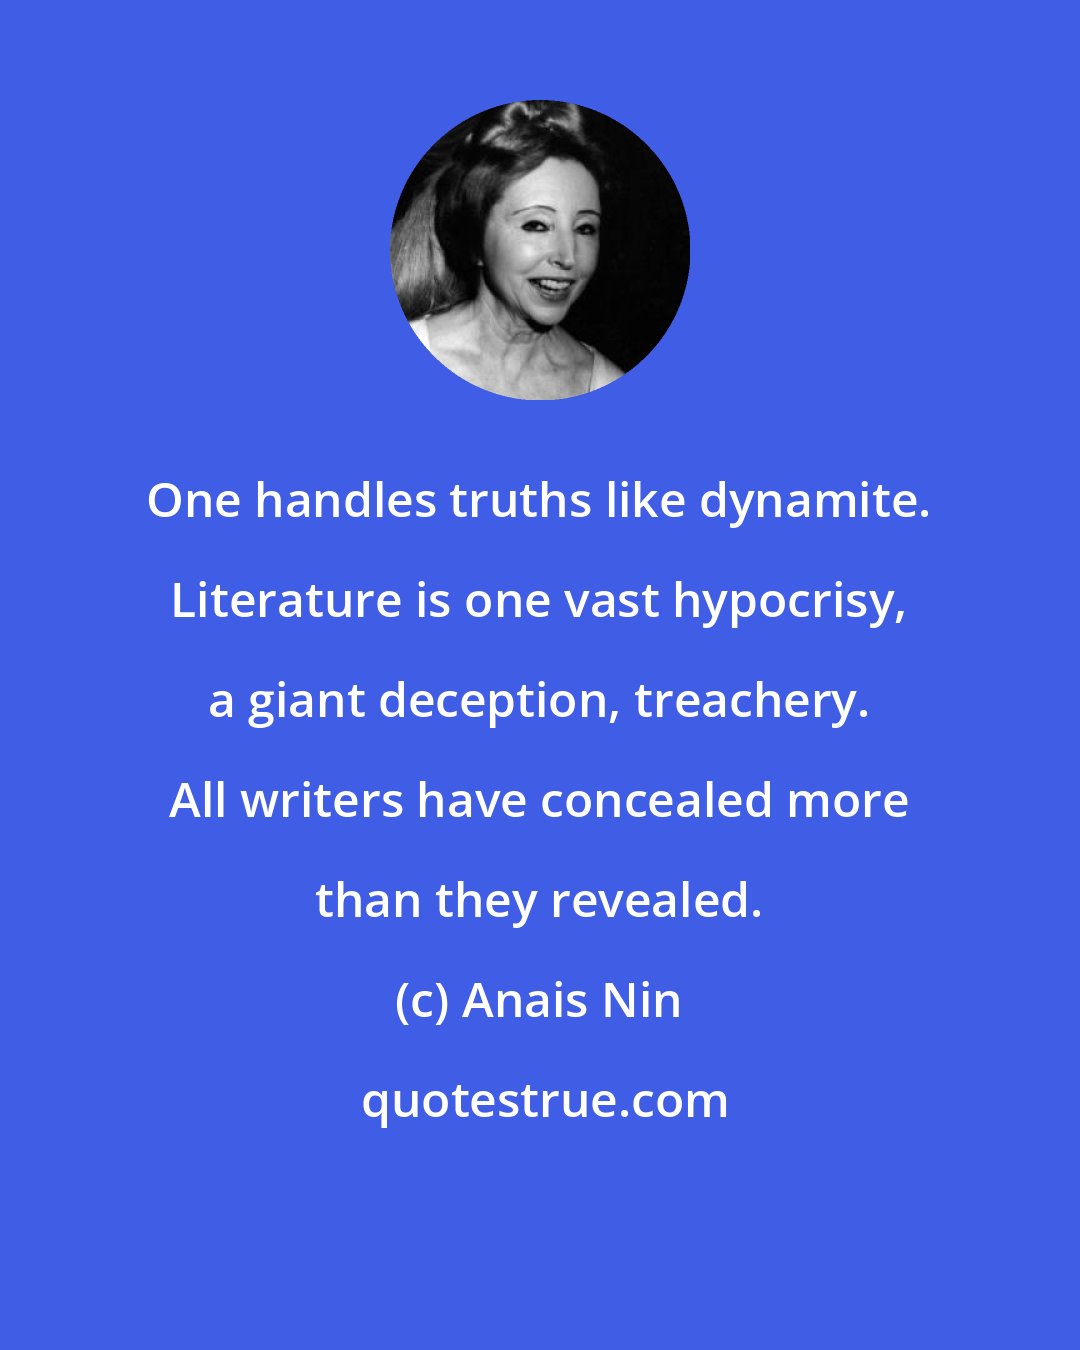 Anais Nin: One handles truths like dynamite. Literature is one vast hypocrisy, a giant deception, treachery. All writers have concealed more than they revealed.